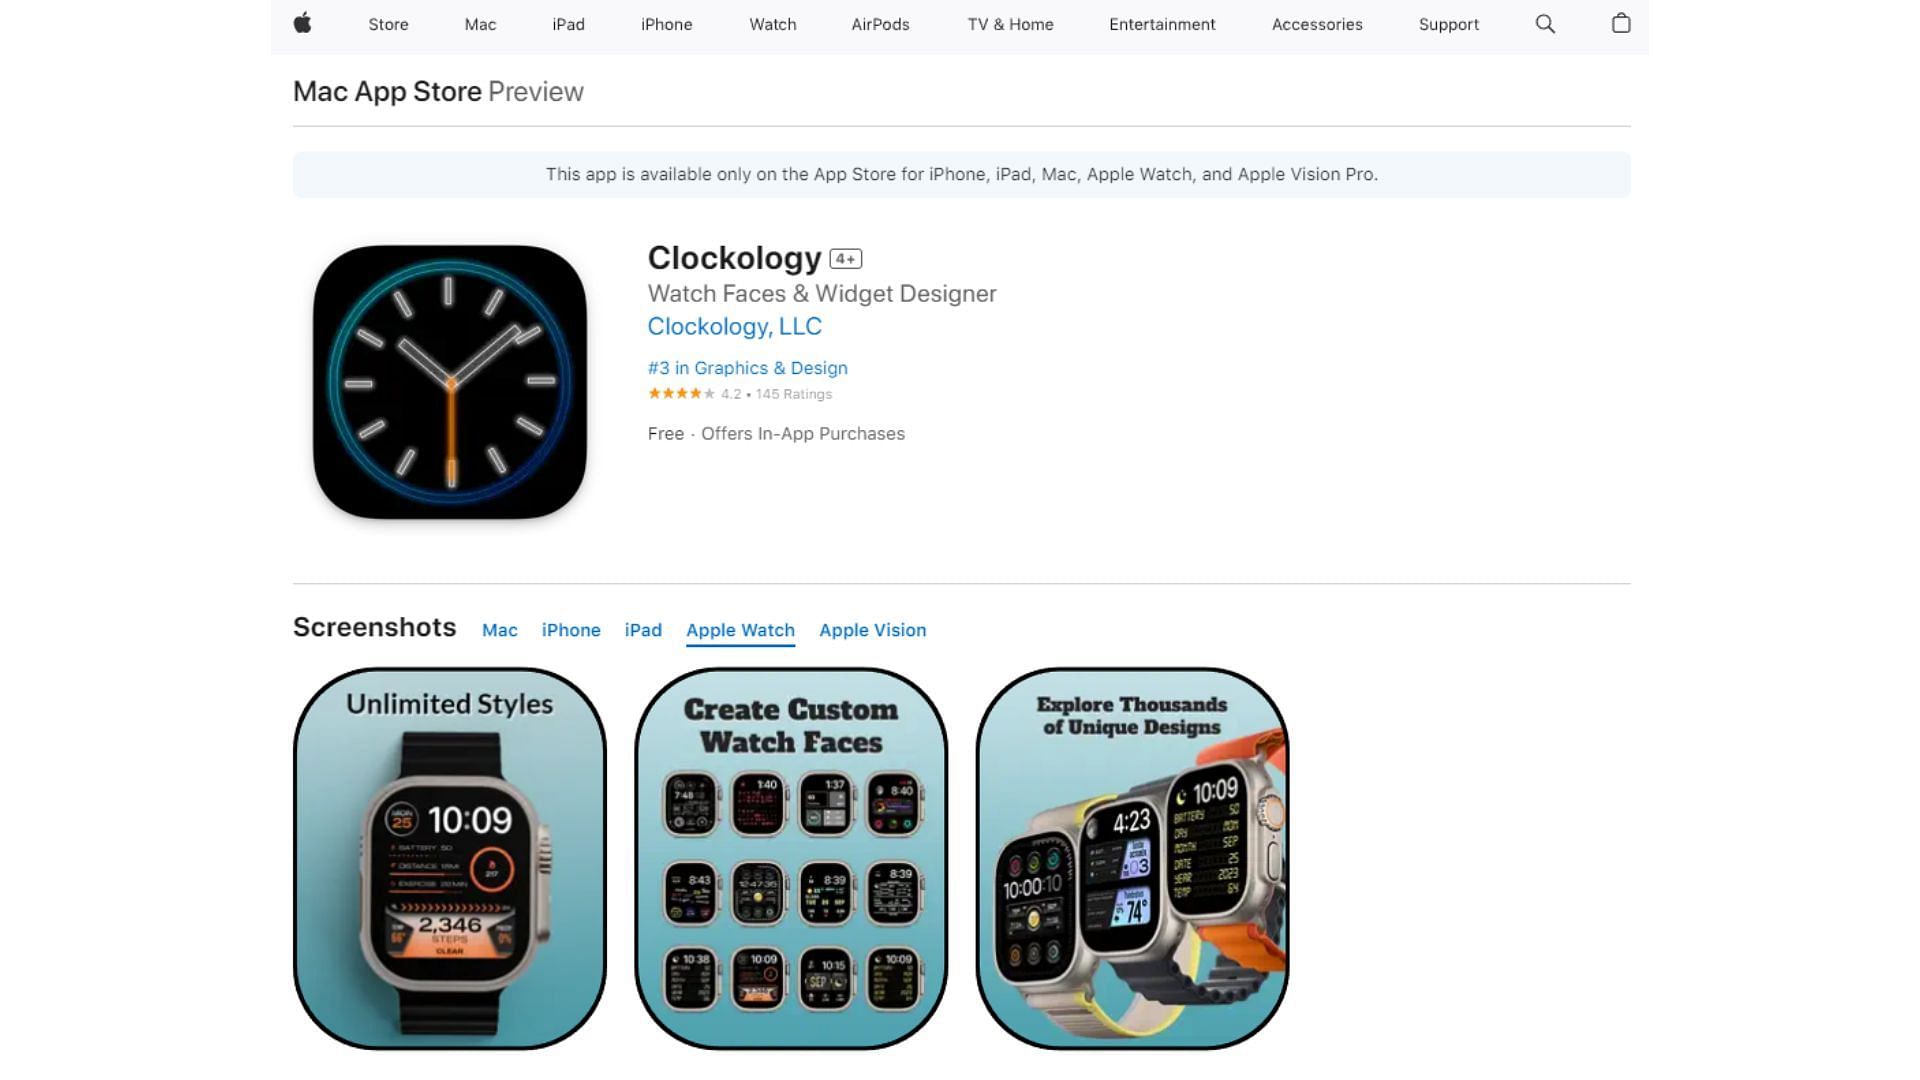 Clockology is quite easy to find in the App Store (Image via Clockology, LLC, Apple)